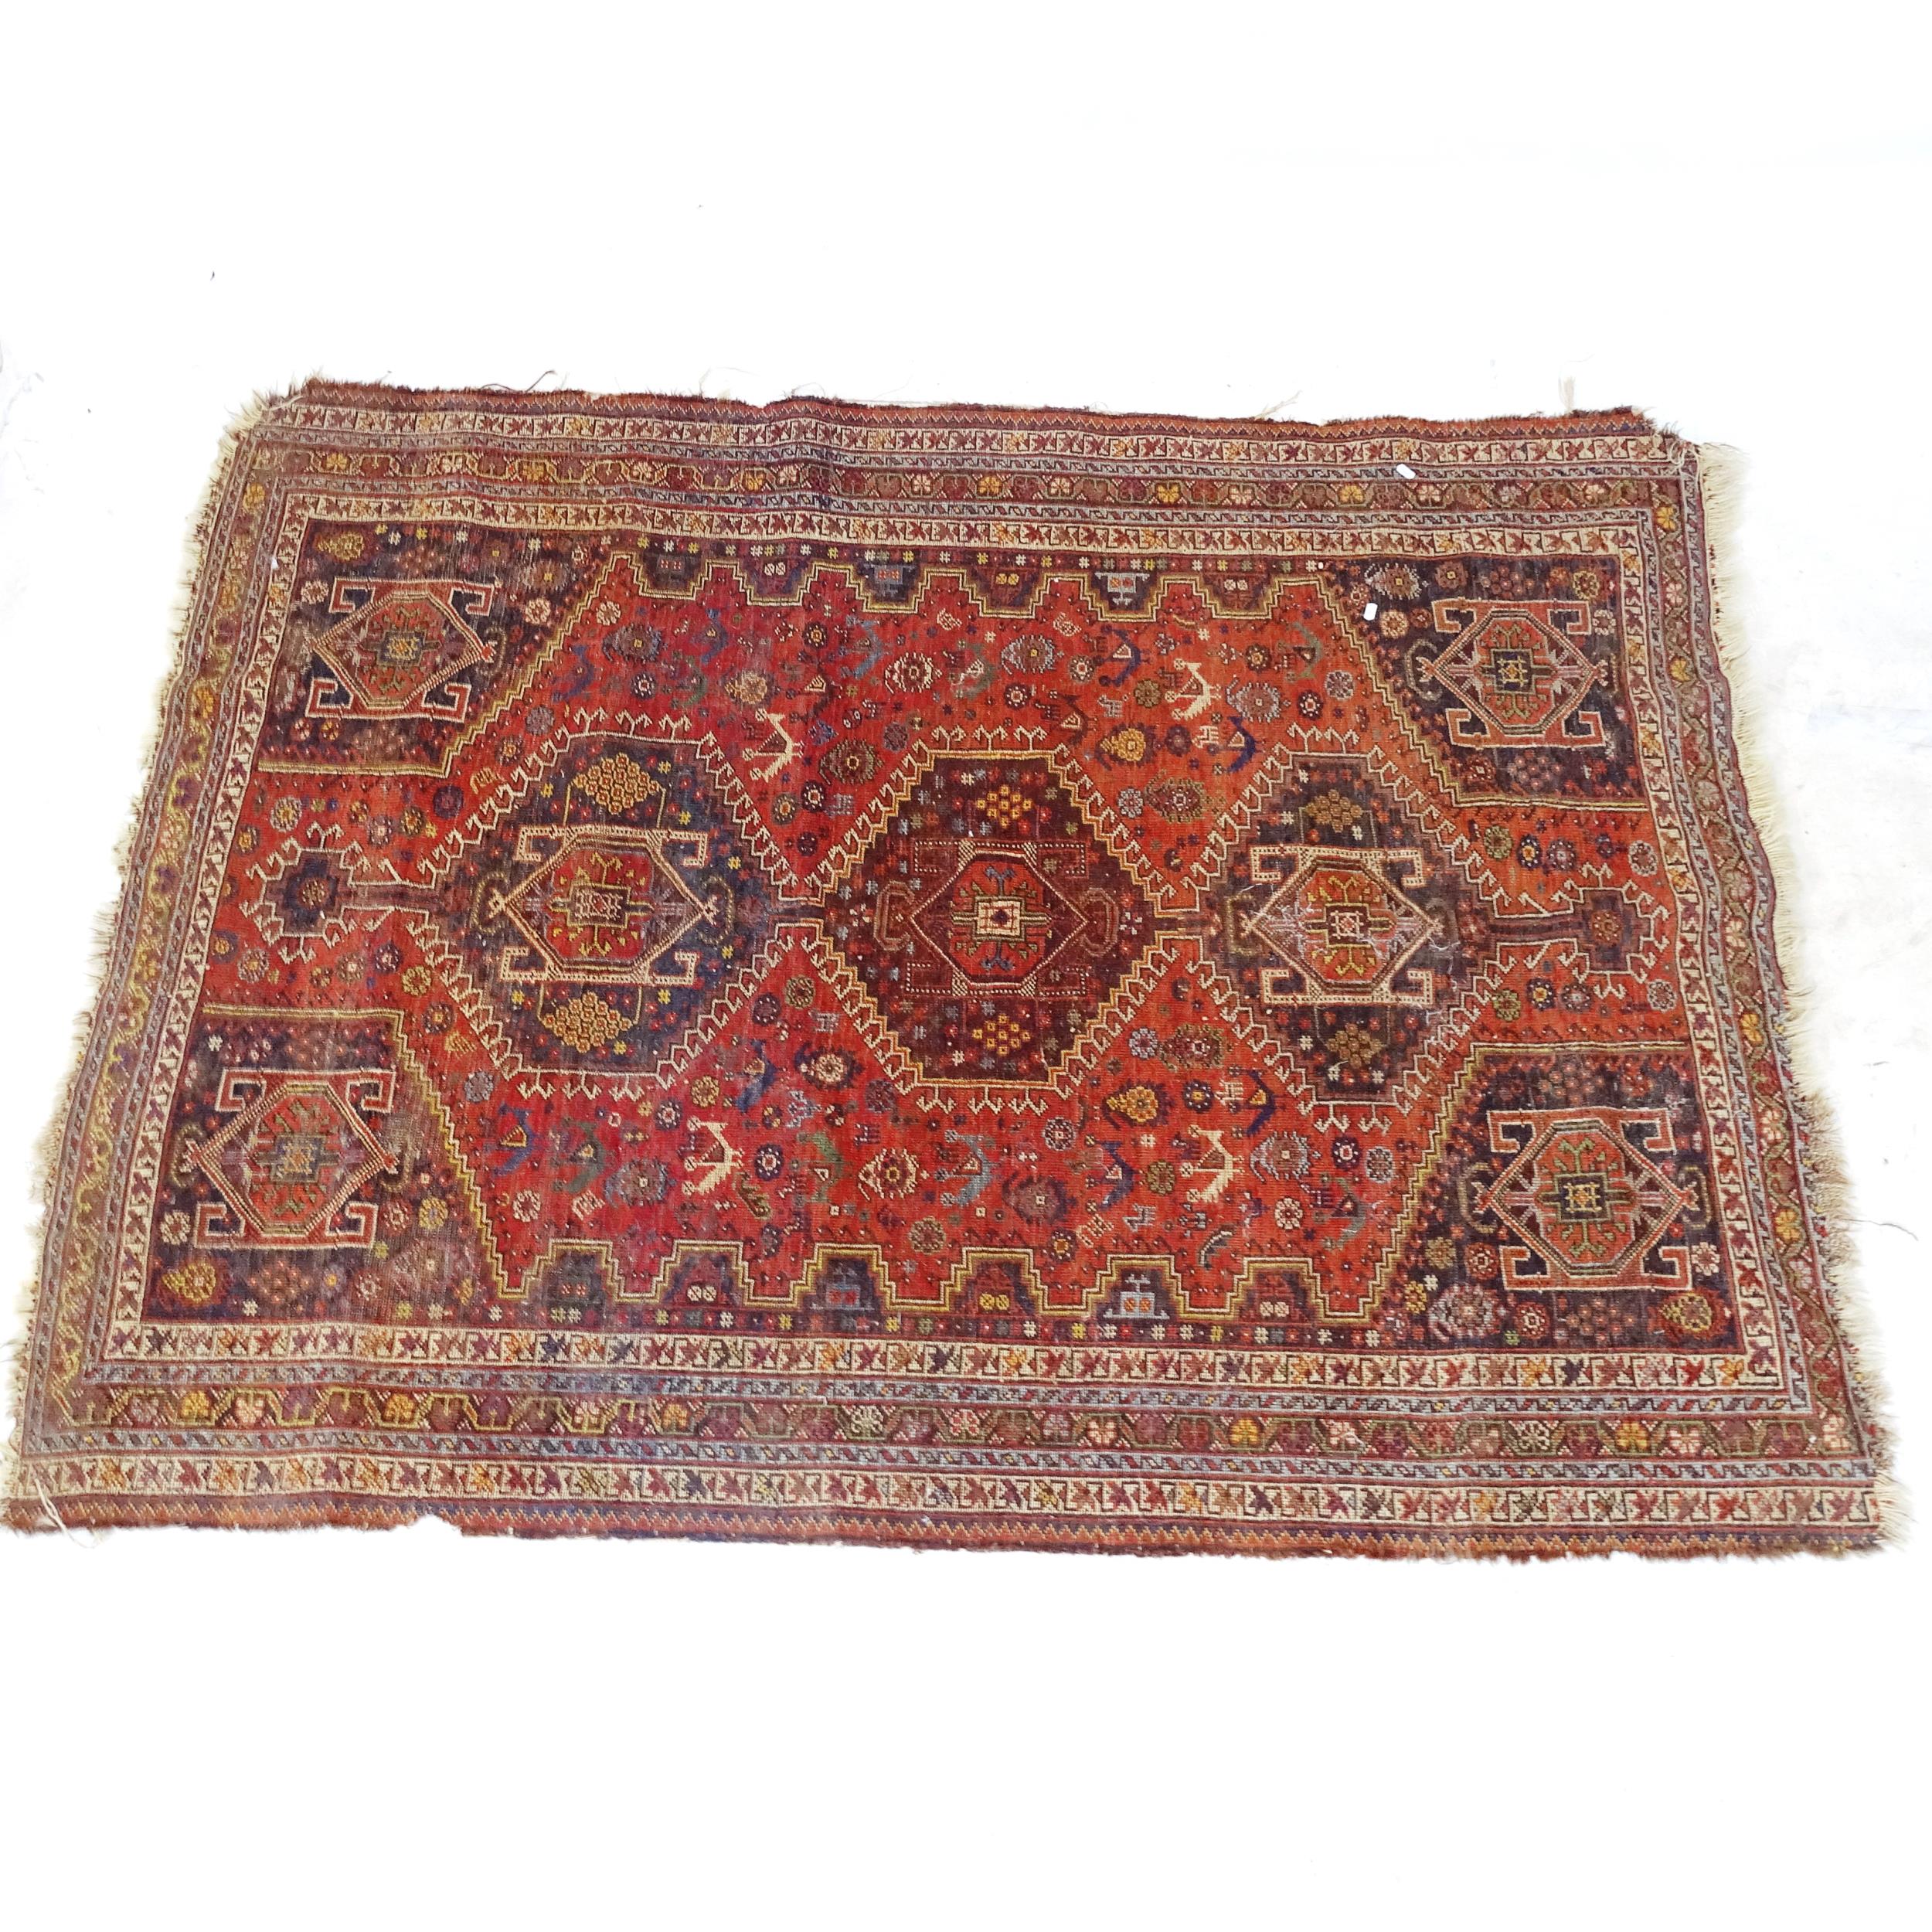 An Antique red ground Persian rug, with 5 symmetrical panel border and lozenge, 200cm x 150cm - Image 2 of 2